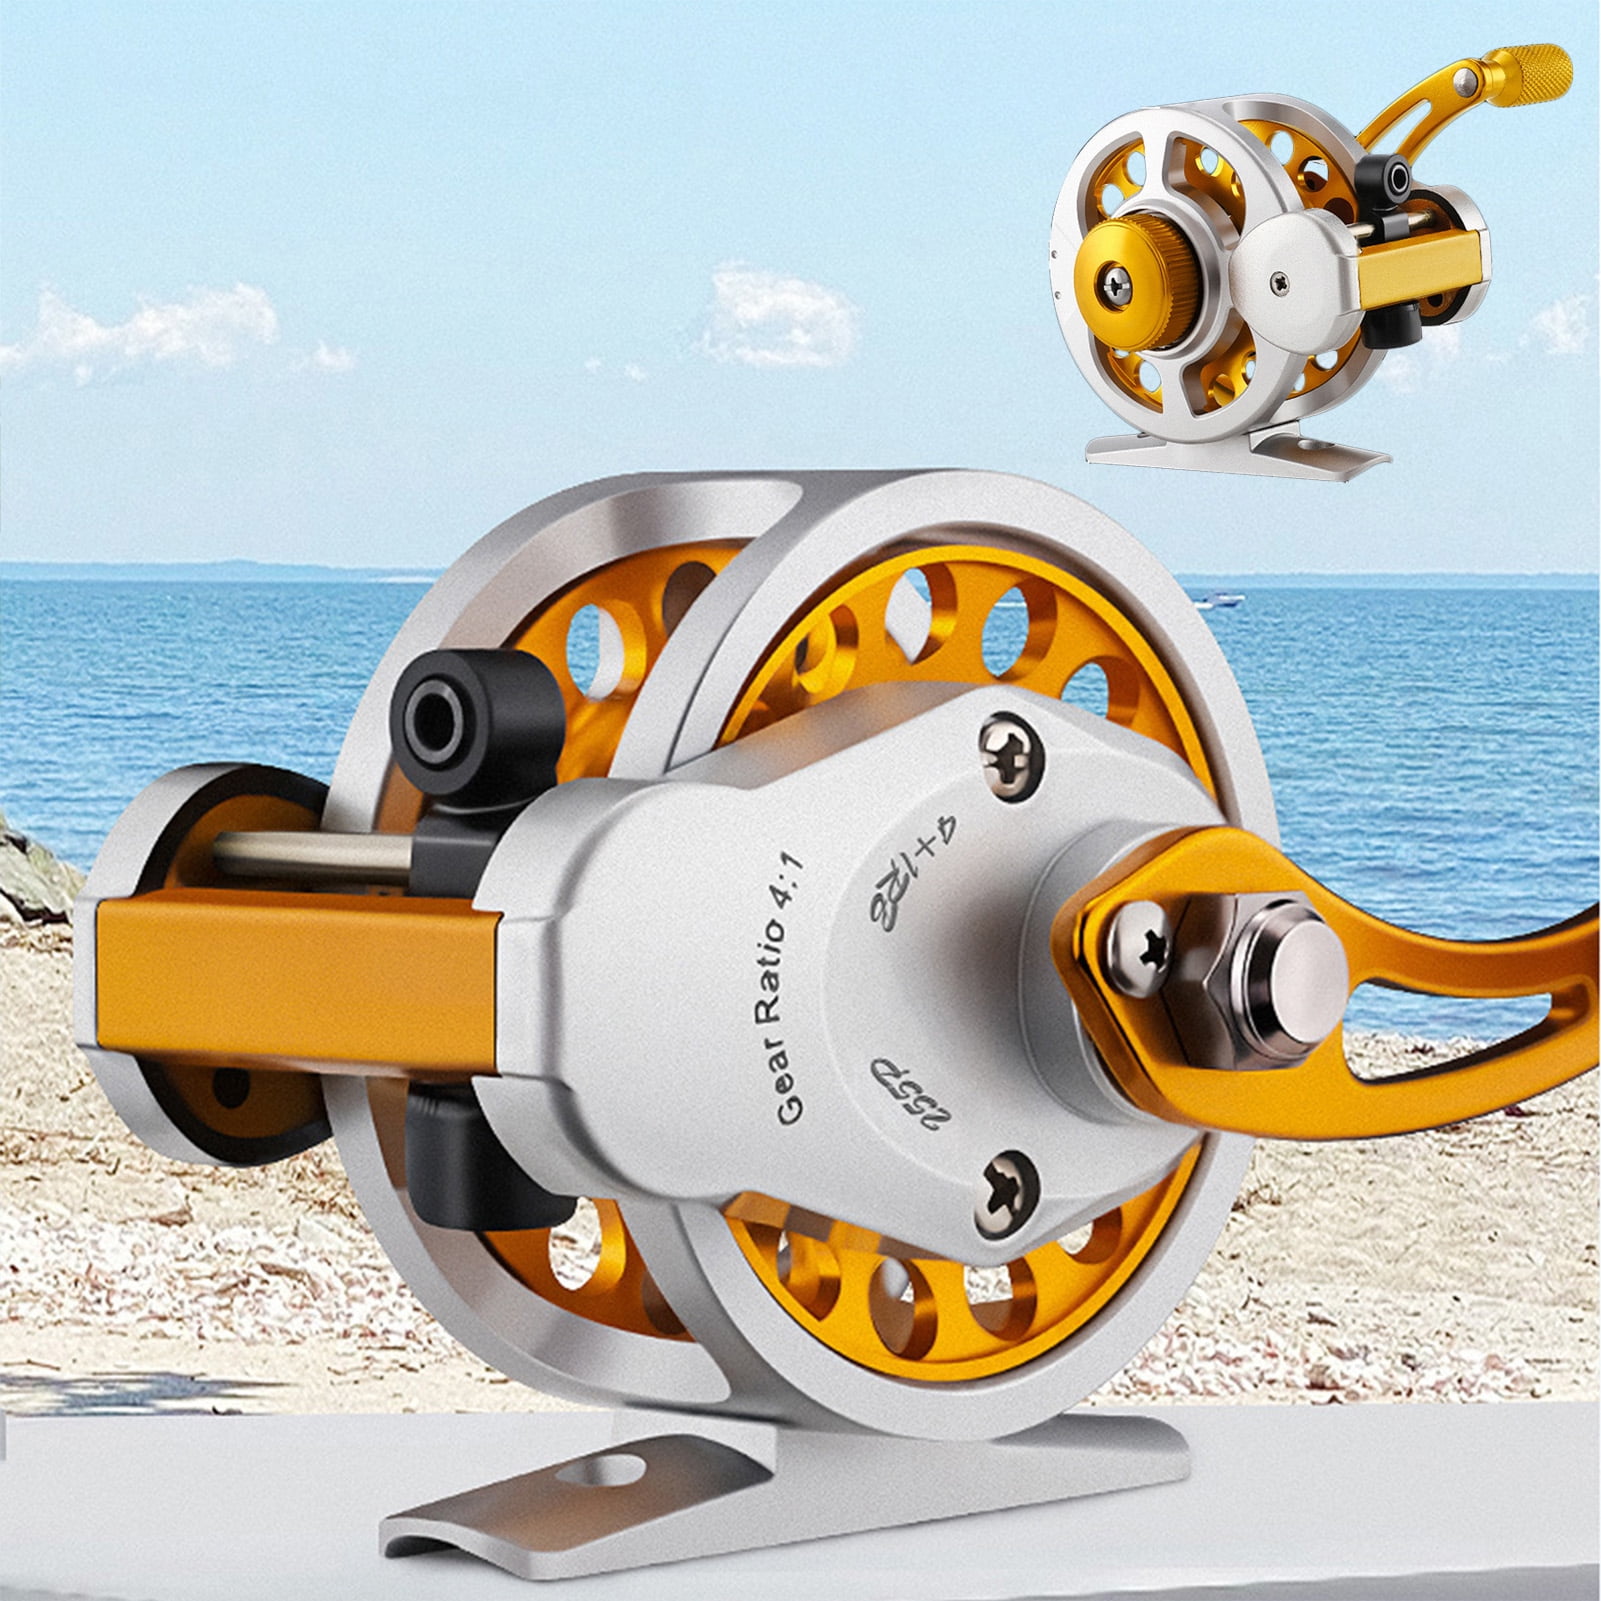 Fairnull High Speed Outdoor Mini Fishing Reel Smooth Spinning